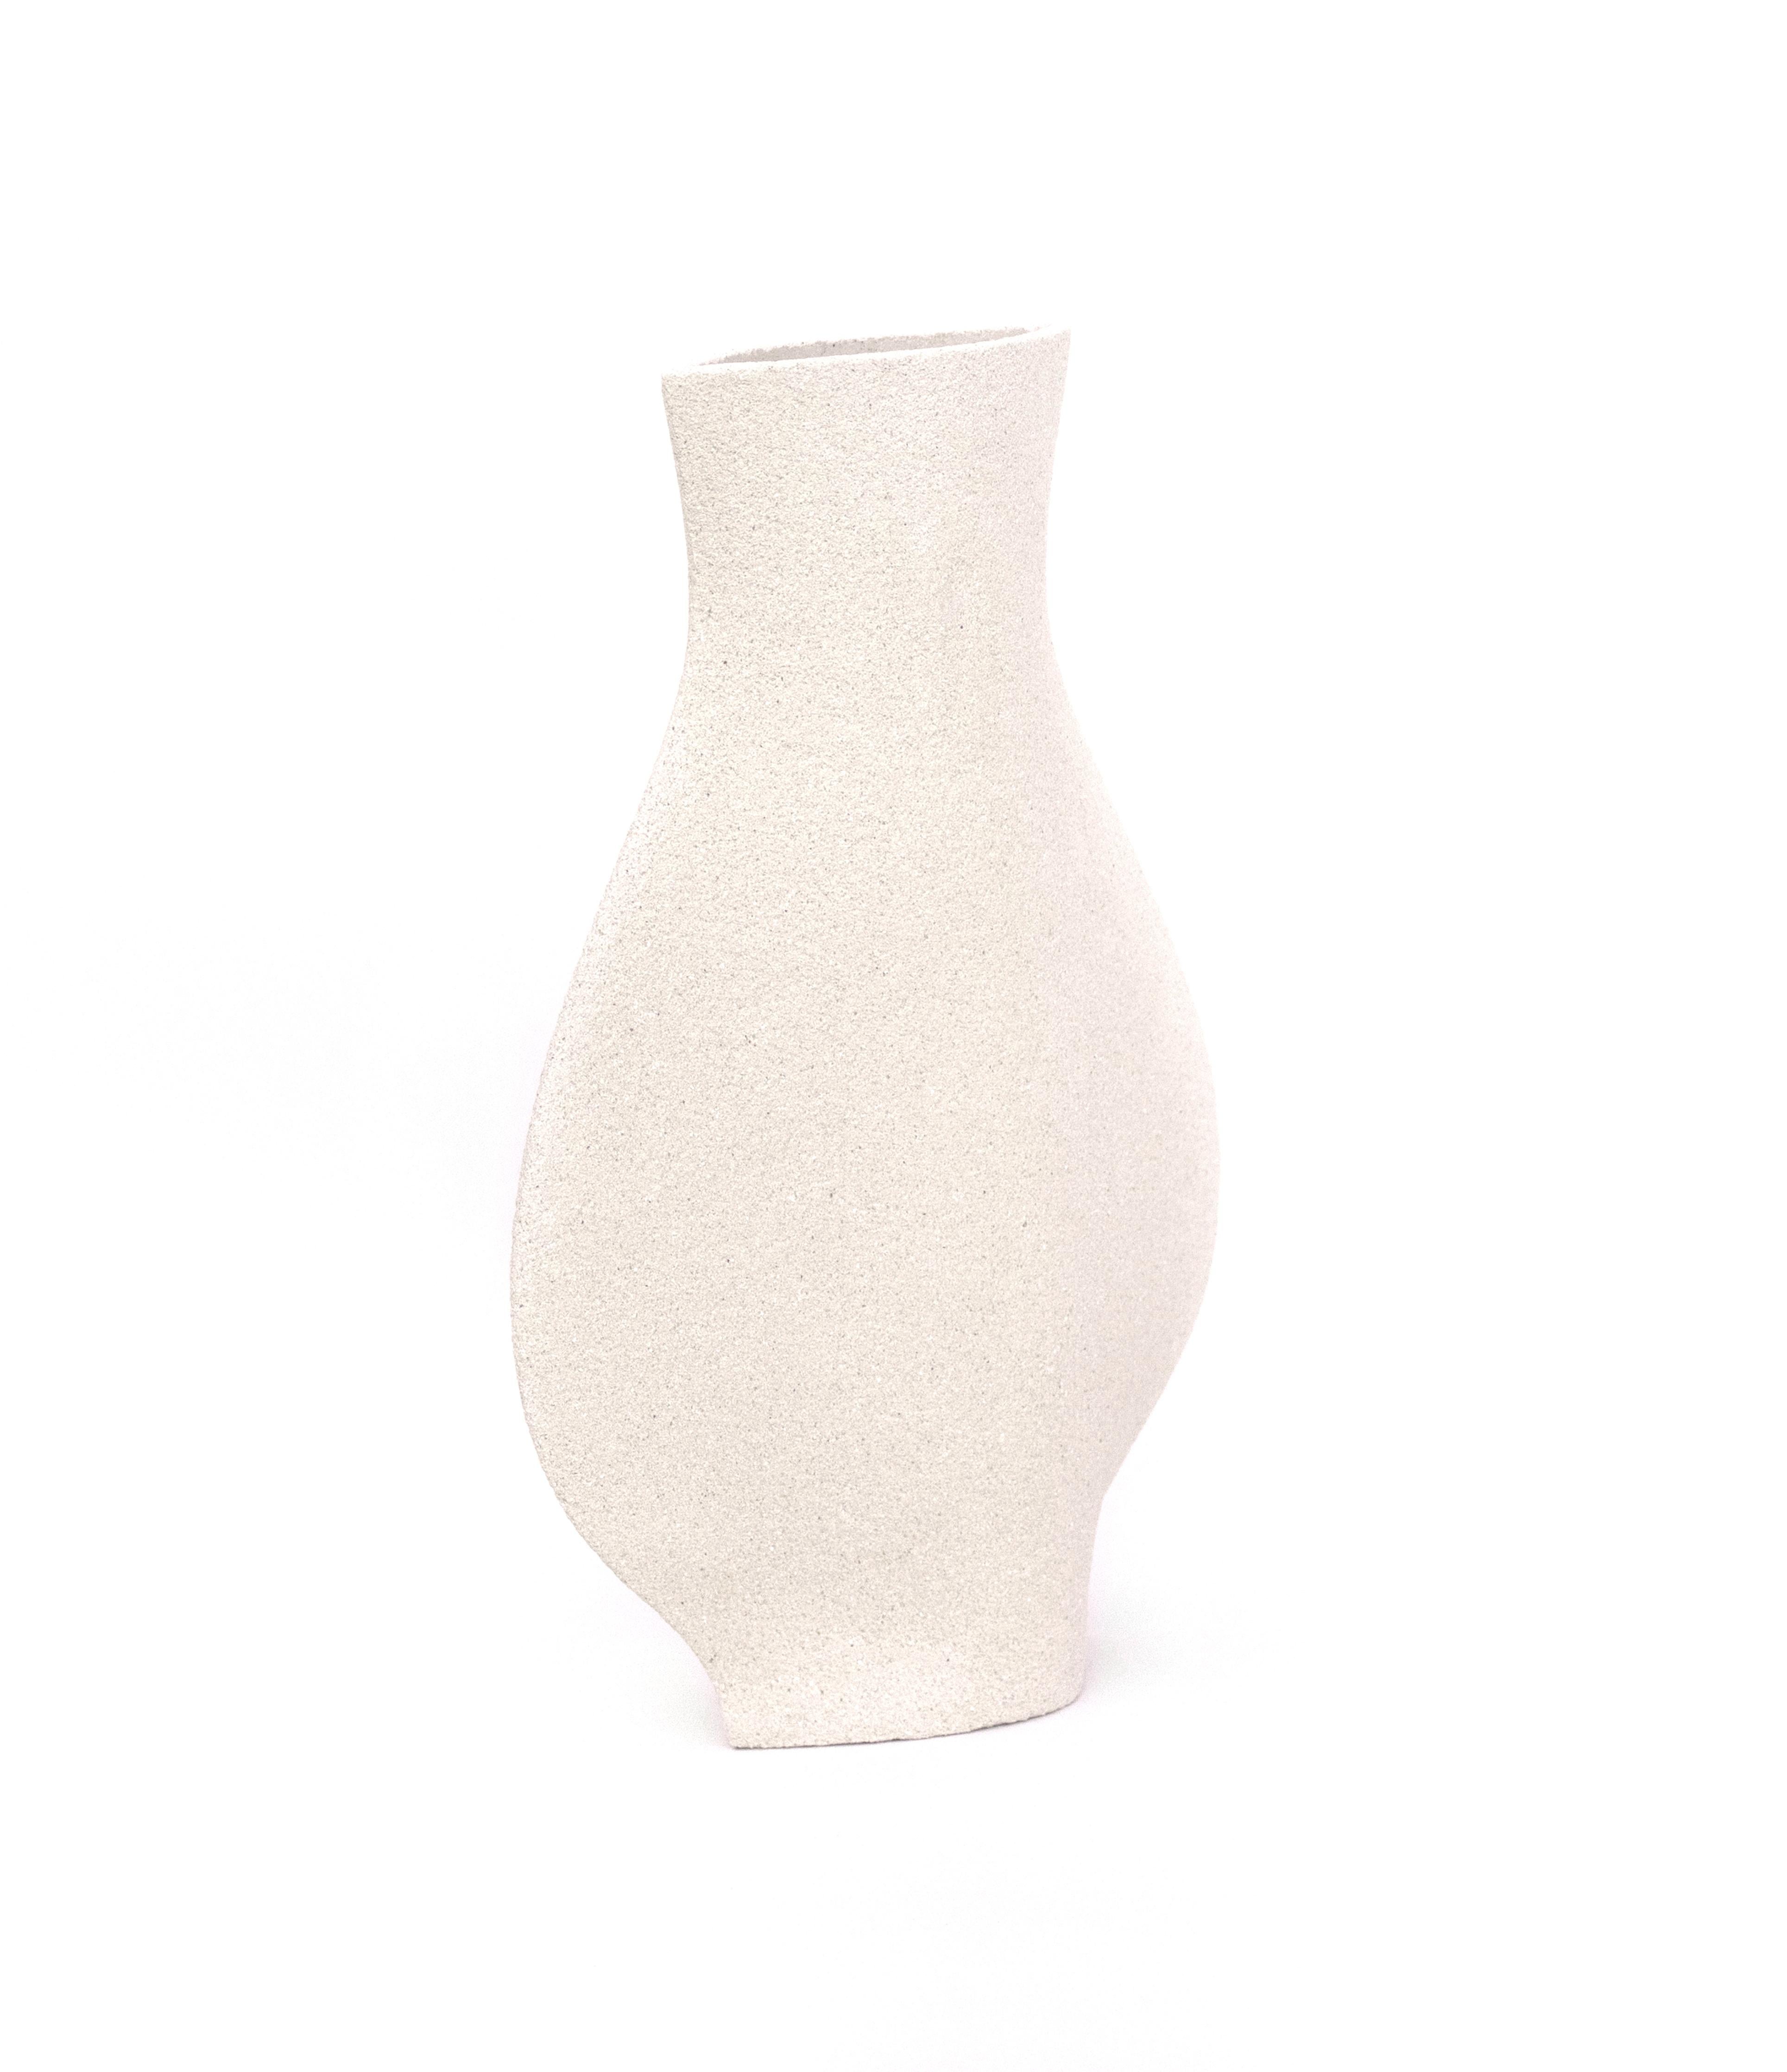 Jarre - white

Hand-crafted in our studio in France.

H: 24.5 cm / L: 19 cm
H: 9.5 inch. / L: 7.5 inch.

- Stoneware fired at high temperature finished with transparent glossy glaze inside.
- Raw exterior showcasing the natural aspect of the